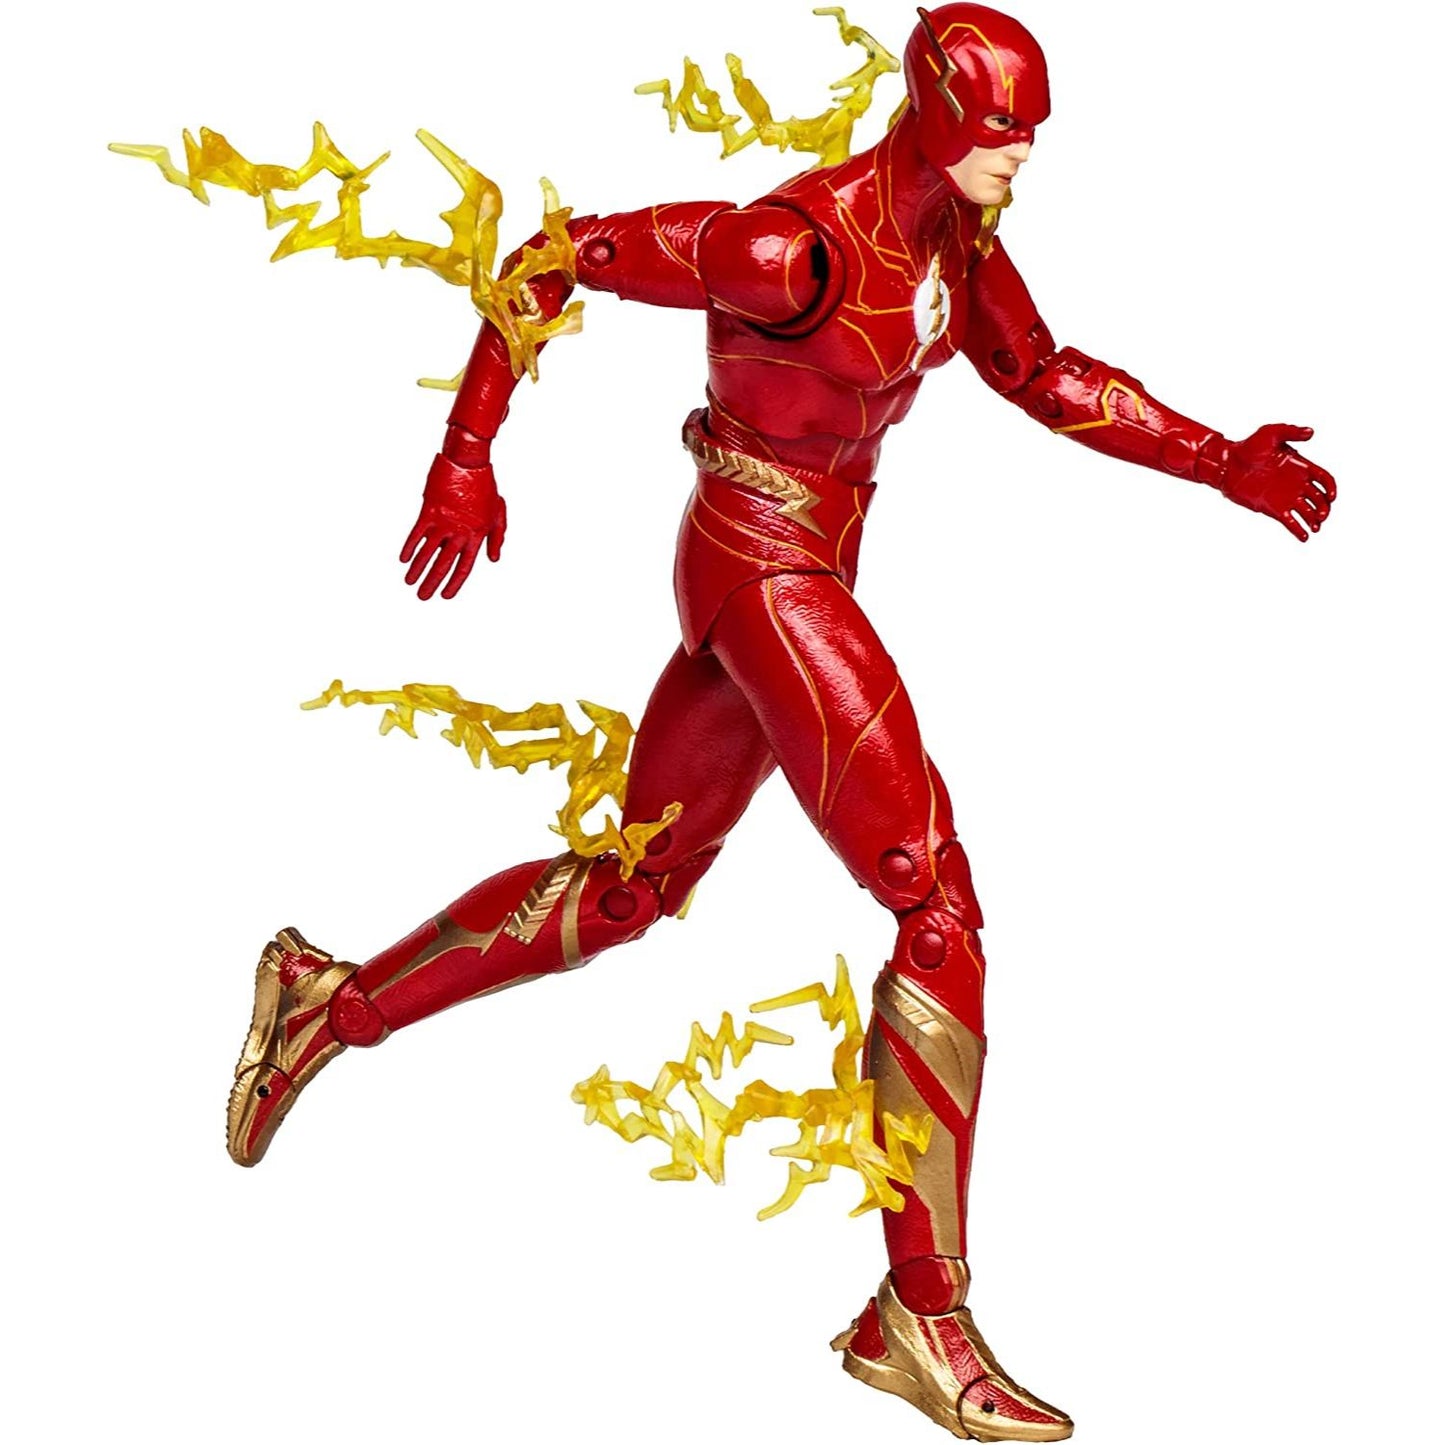 DC Multiverse - The Flash Movie - The Flash Action Figure 7INCh Toy Running Pose- Heretoserveyou